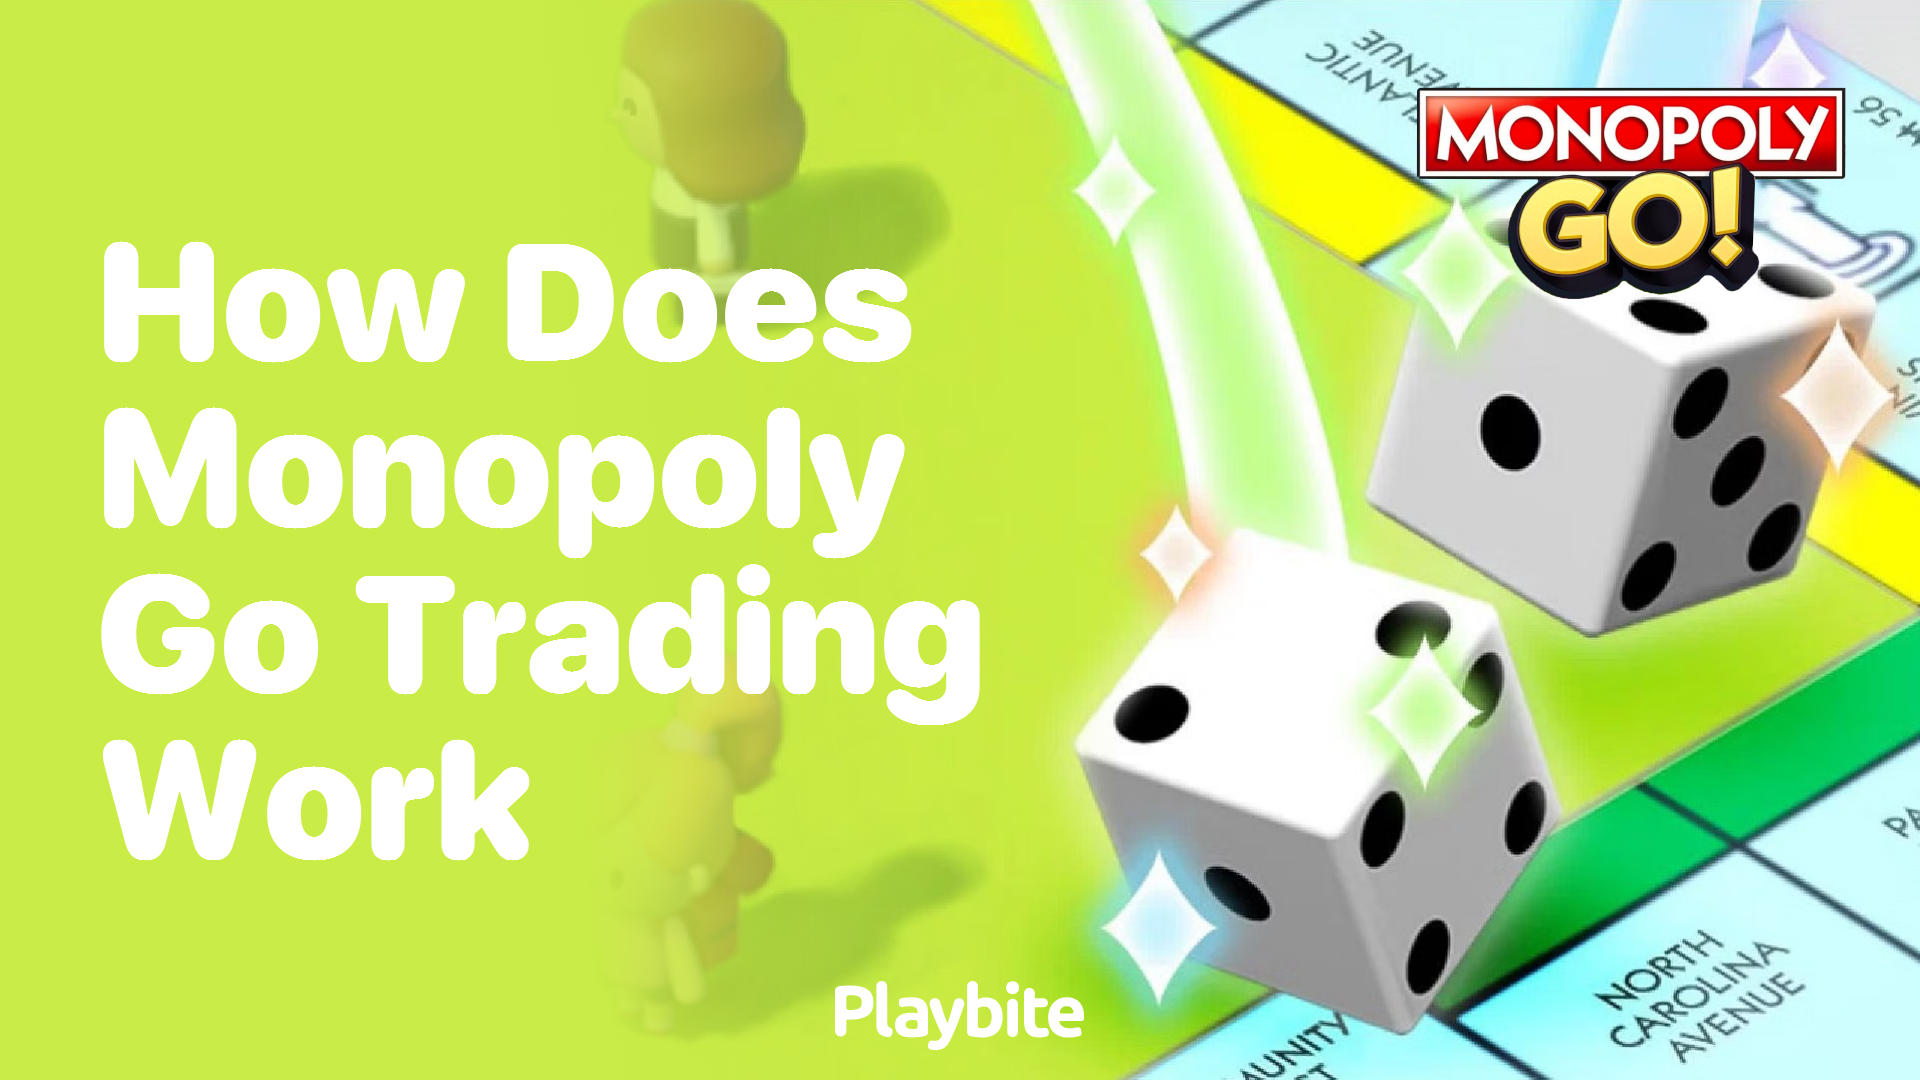 How Does Trading Work in Monopoly Go?